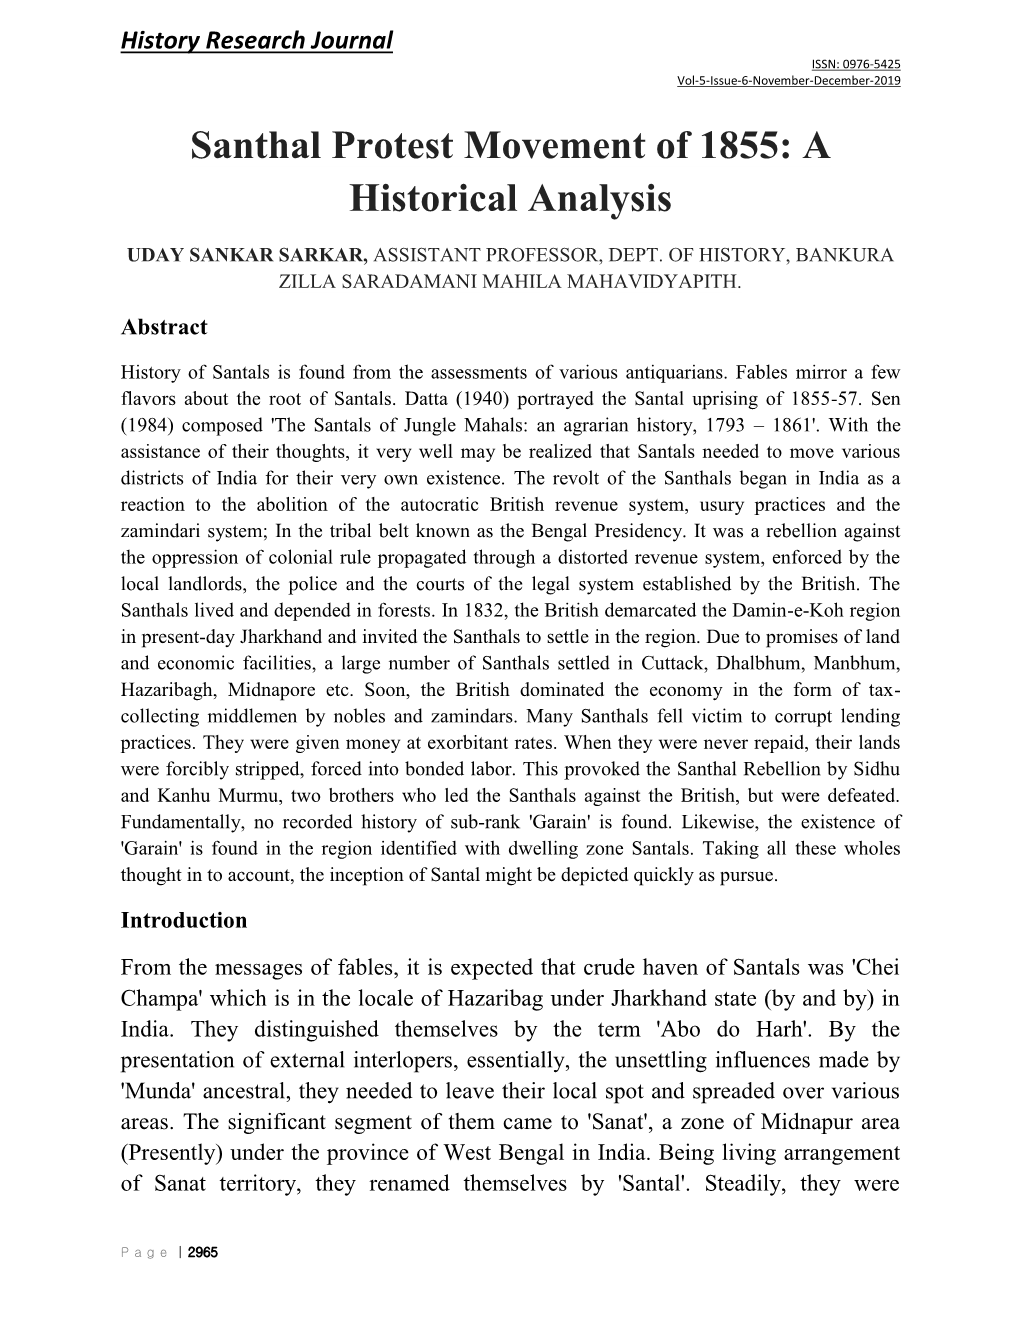 Santhal Protest Movement of 1855: a Historical Analysis